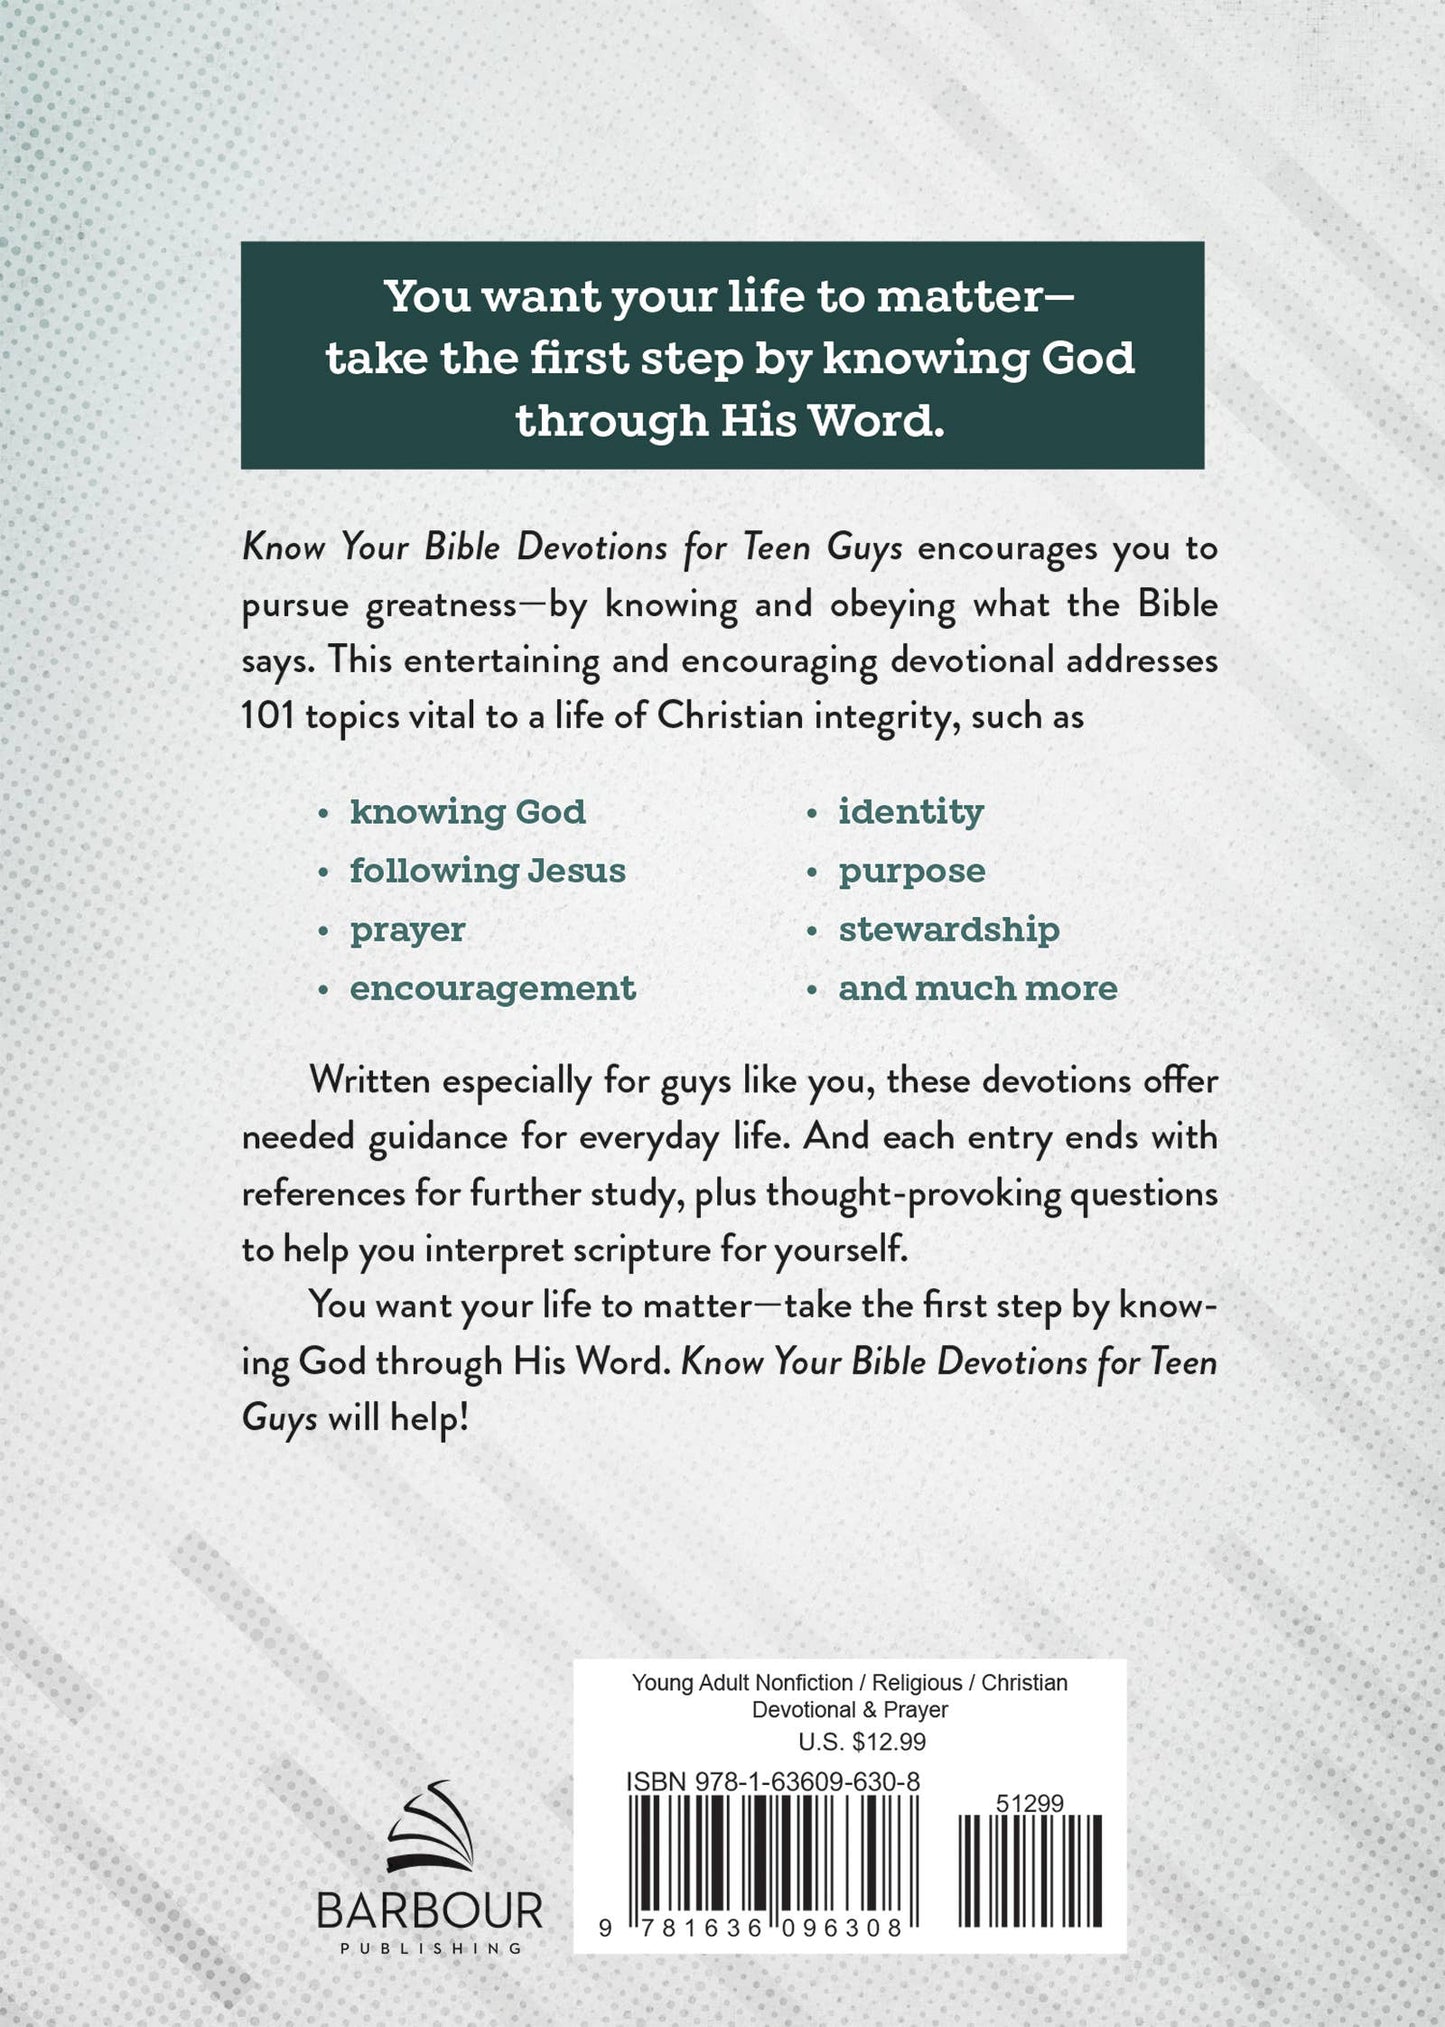 Know Your Bible Devotions for Teen Guys